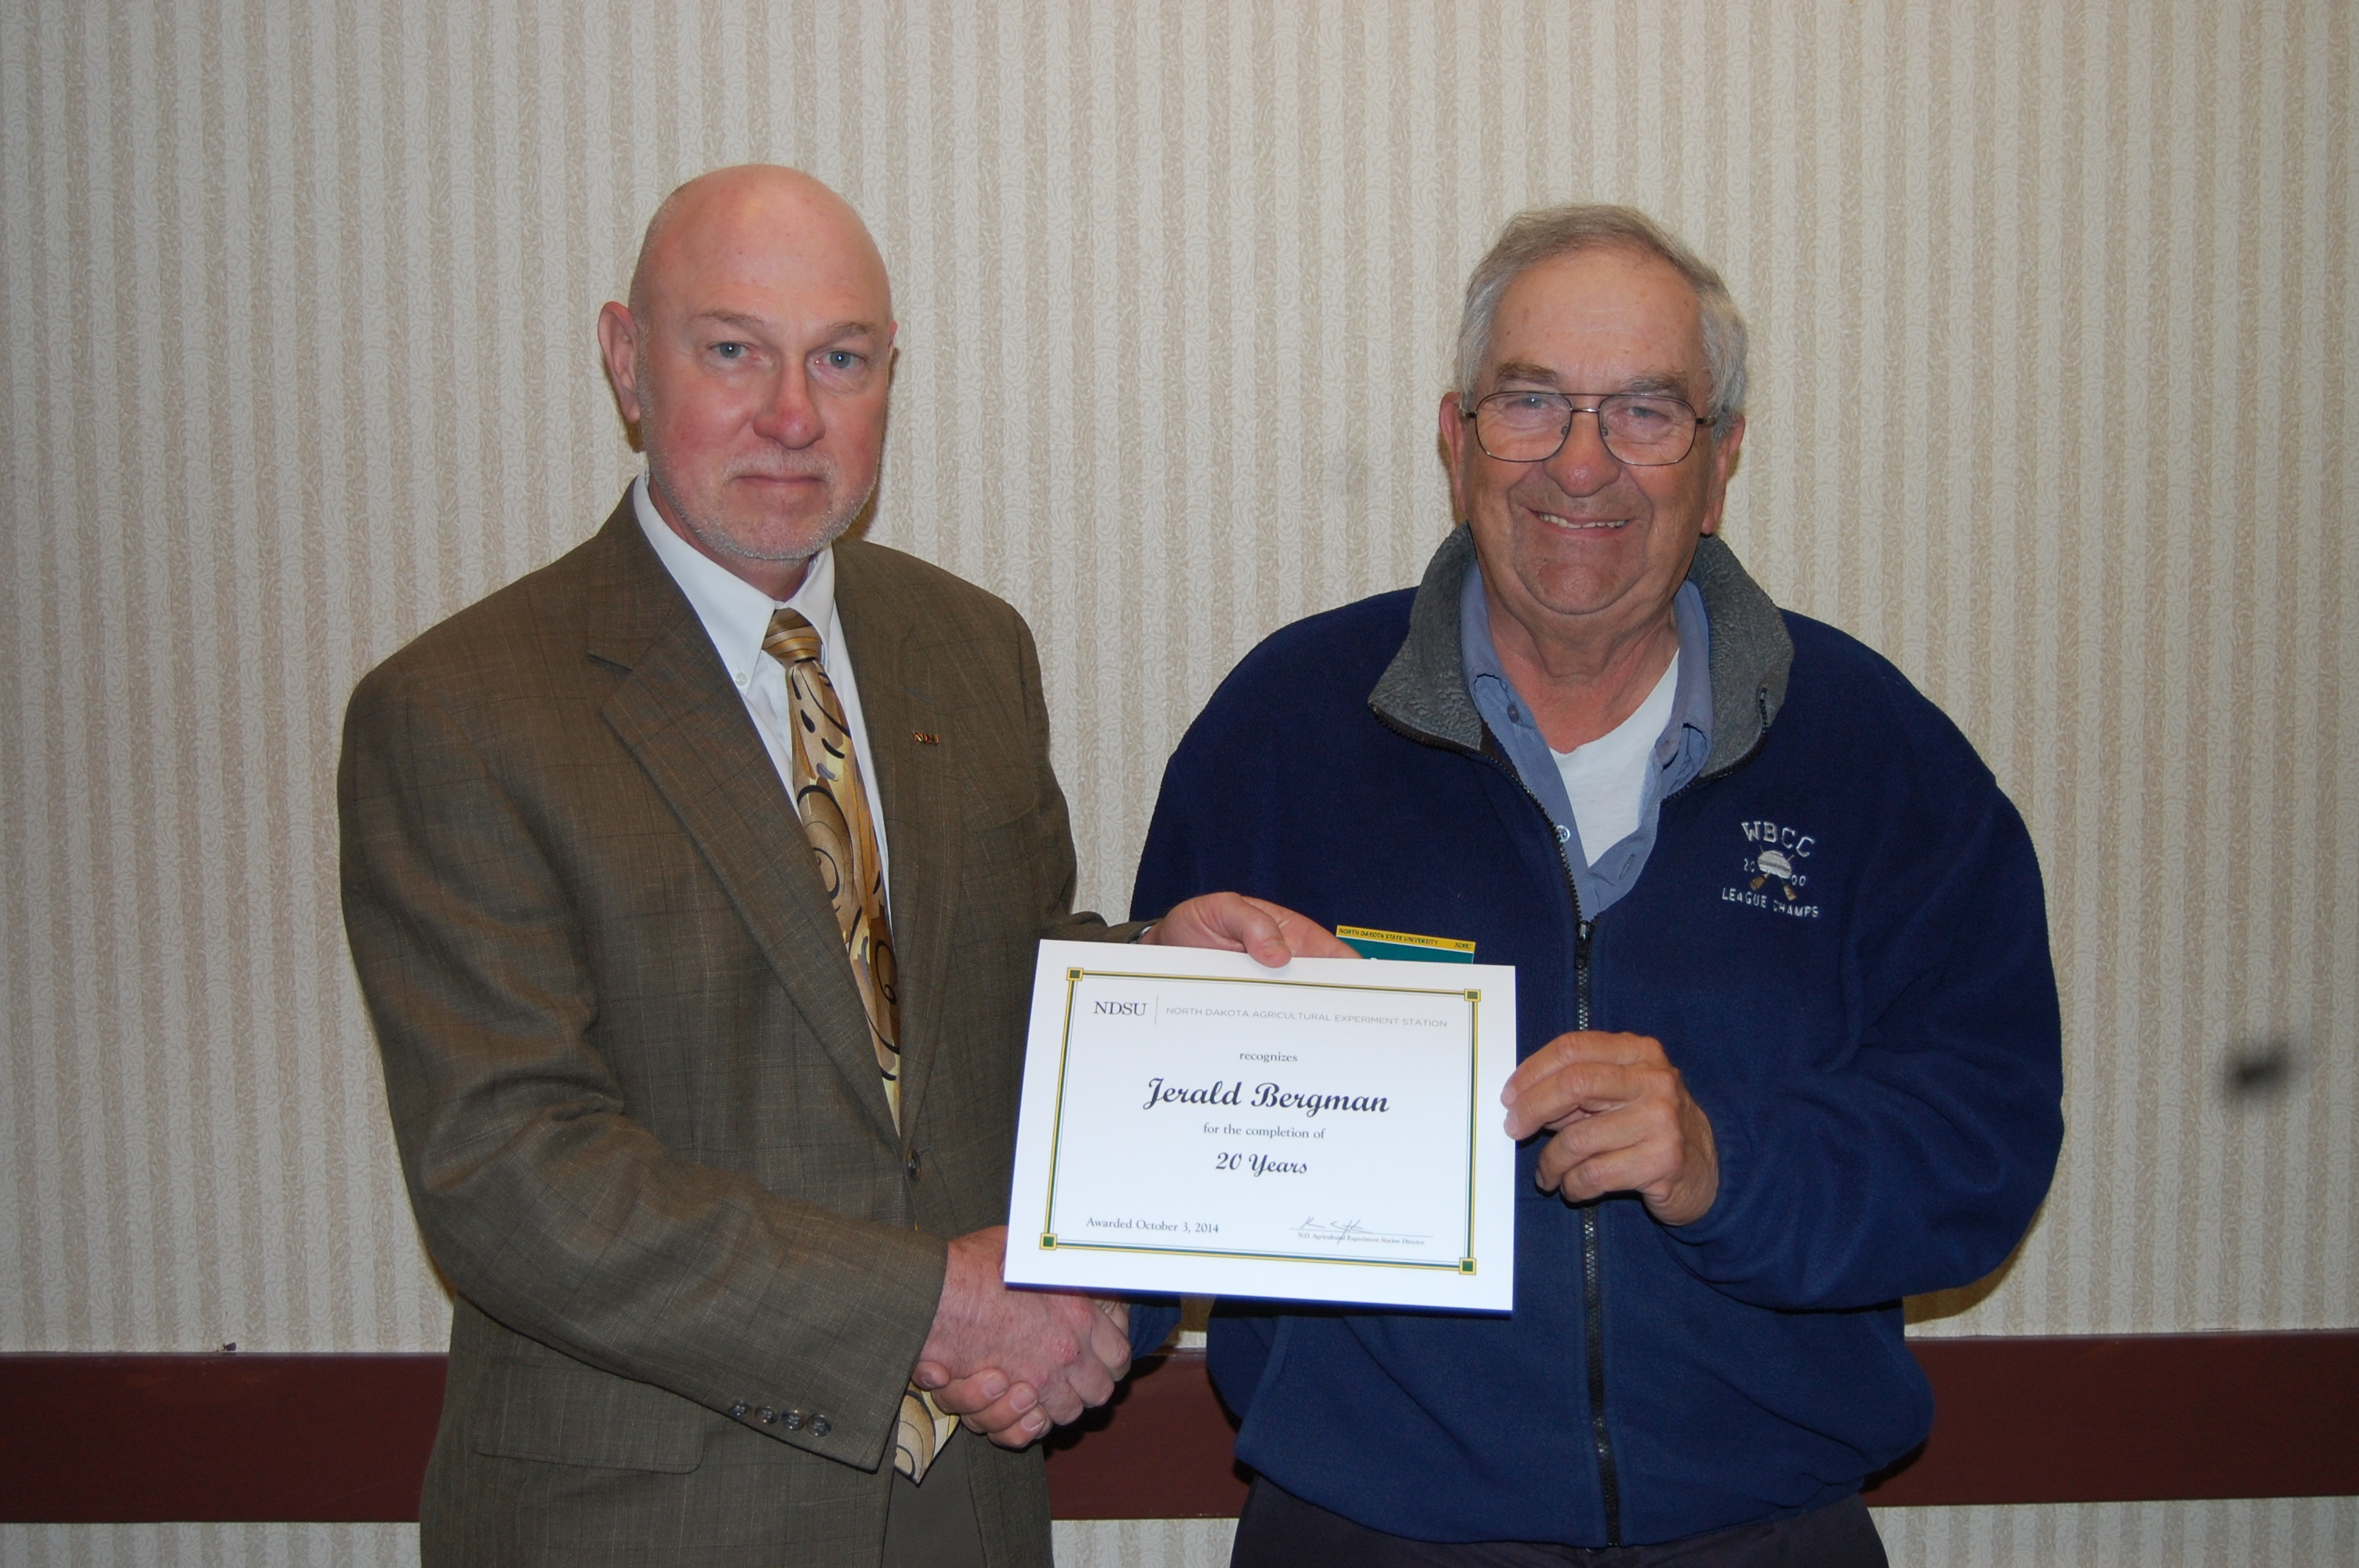 Ken Grafton, vice president for Agricultural Affairs, director of the North Dakota Agricultural Experiment Station and dean of the College of Agriculture, Food Systems, and Natural Resources (left), presents the award to Jerald Bergman.